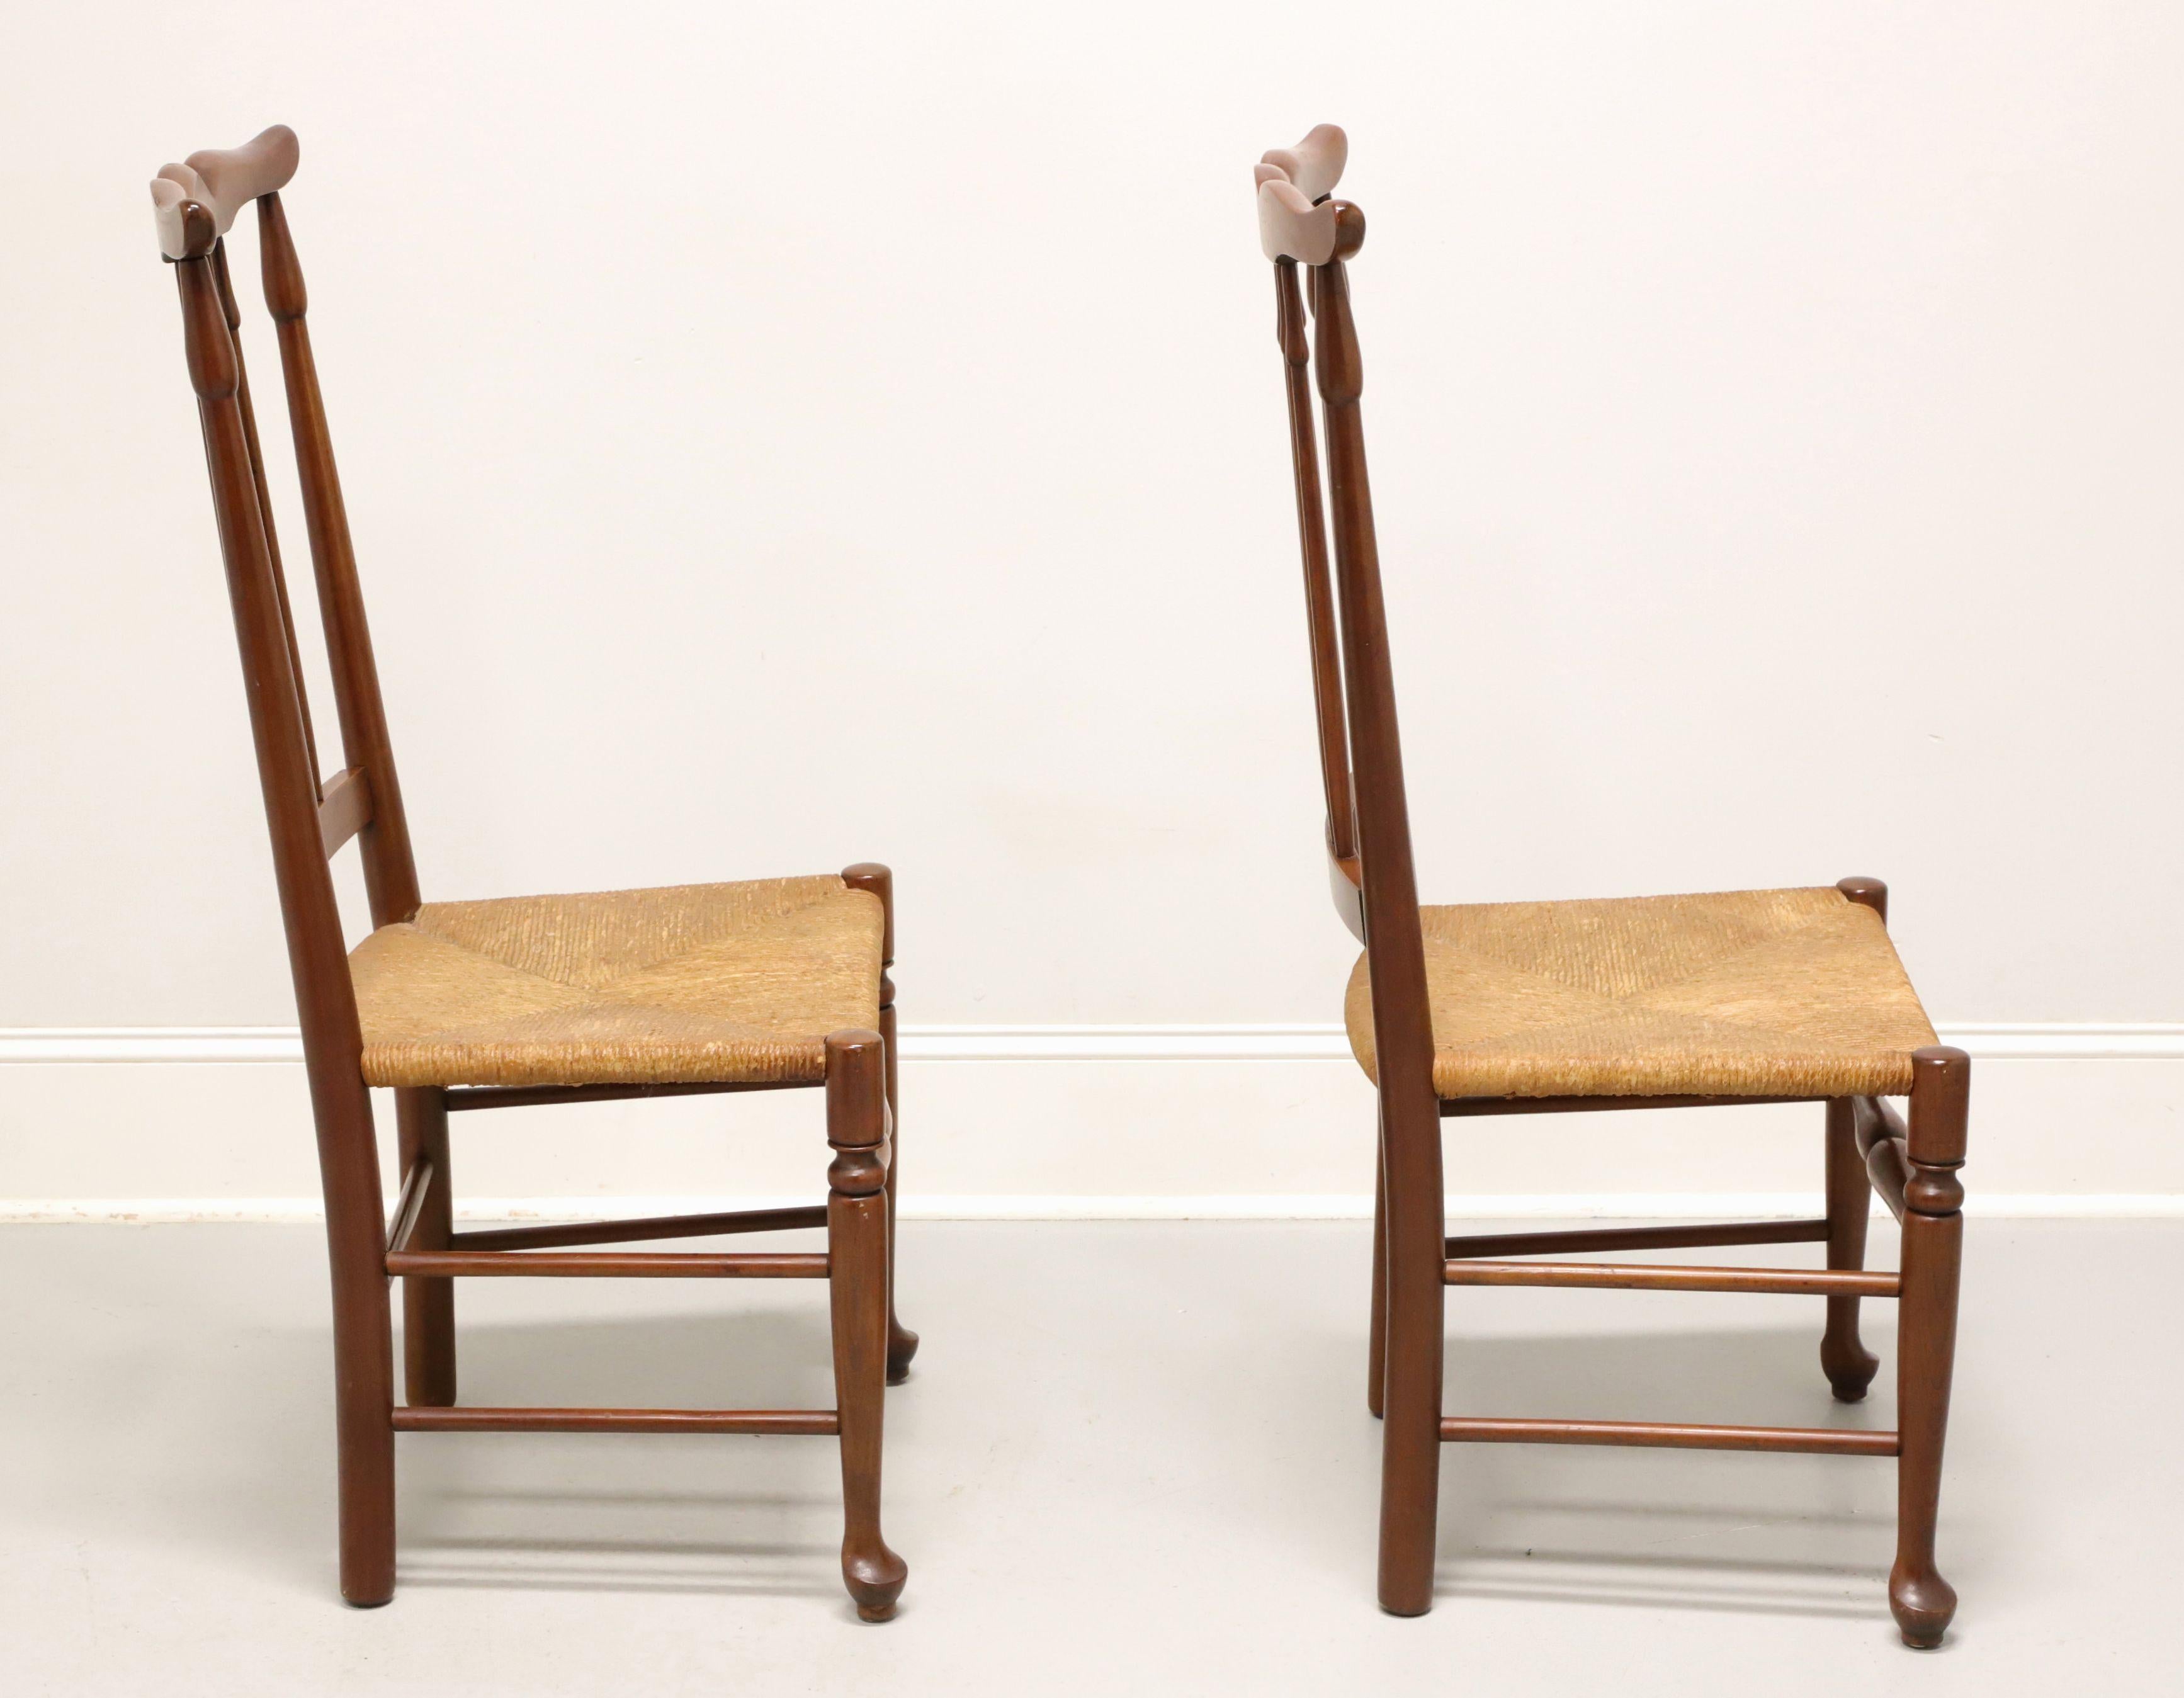 Rustic Mid 20th Century Cherry Farmhouse Dining Side Chairs with Rush Seats - Pair B For Sale